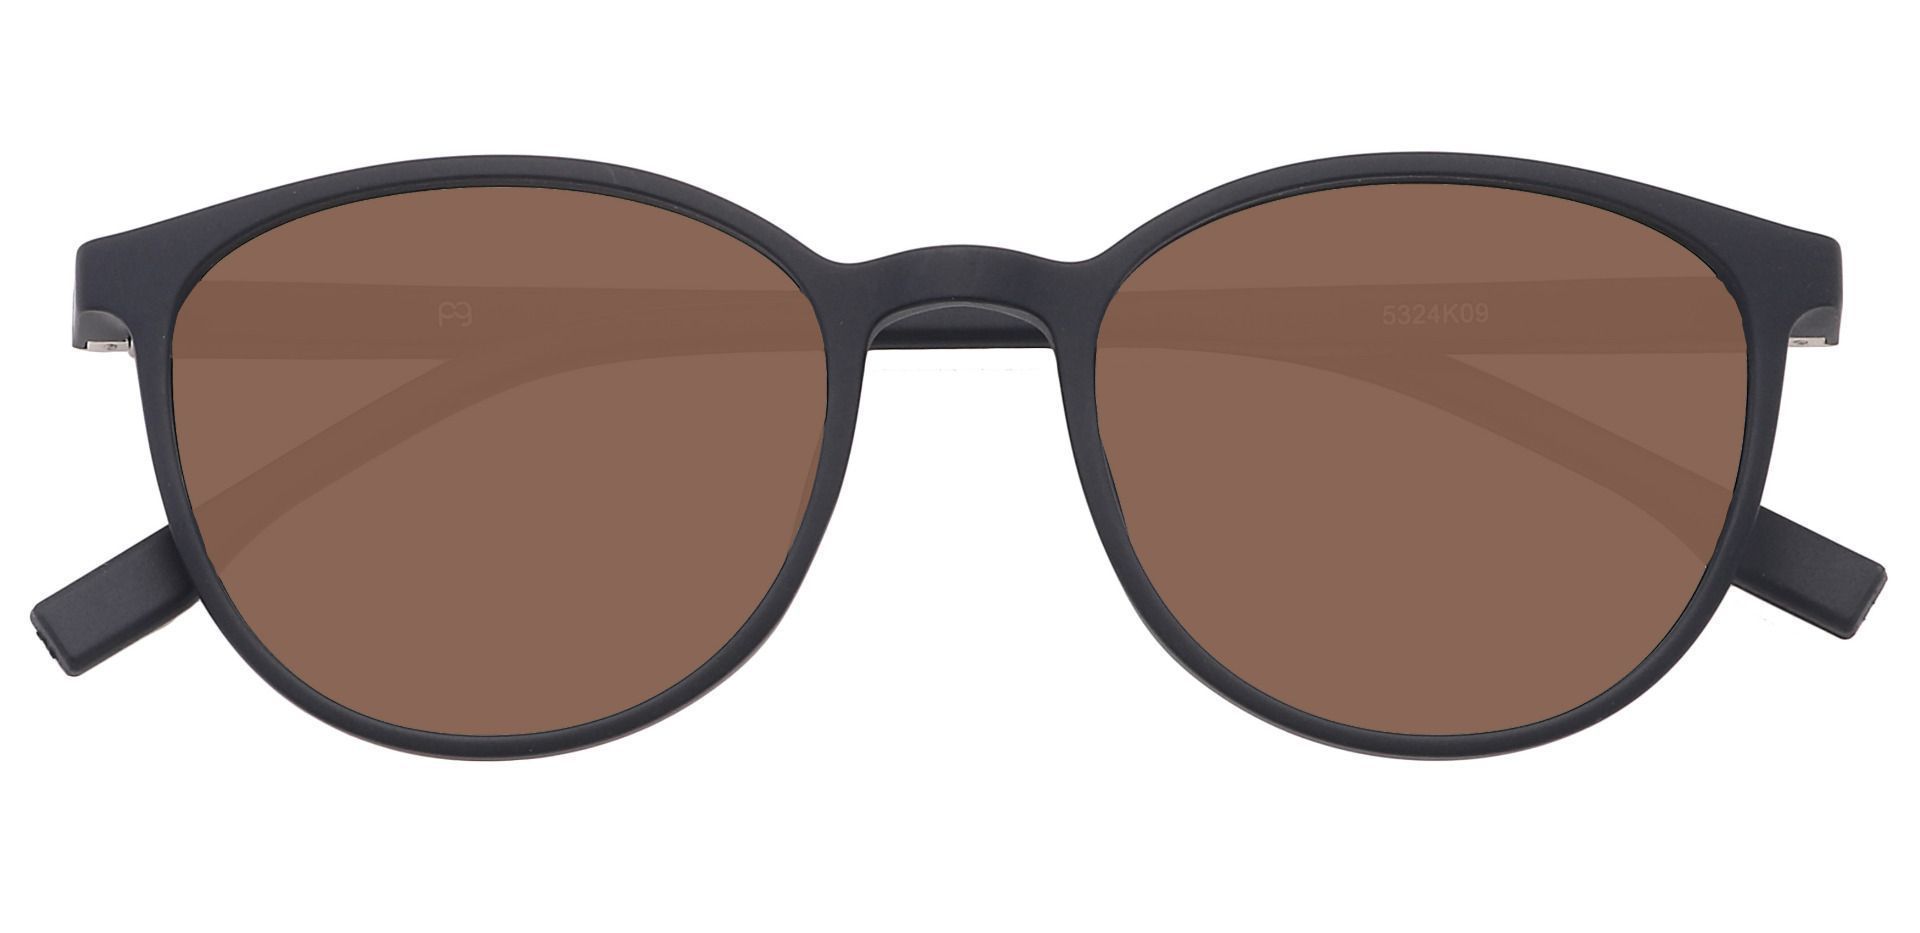 Bay Round Non-Rx Sunglasses - Black Frame With Brown Lenses